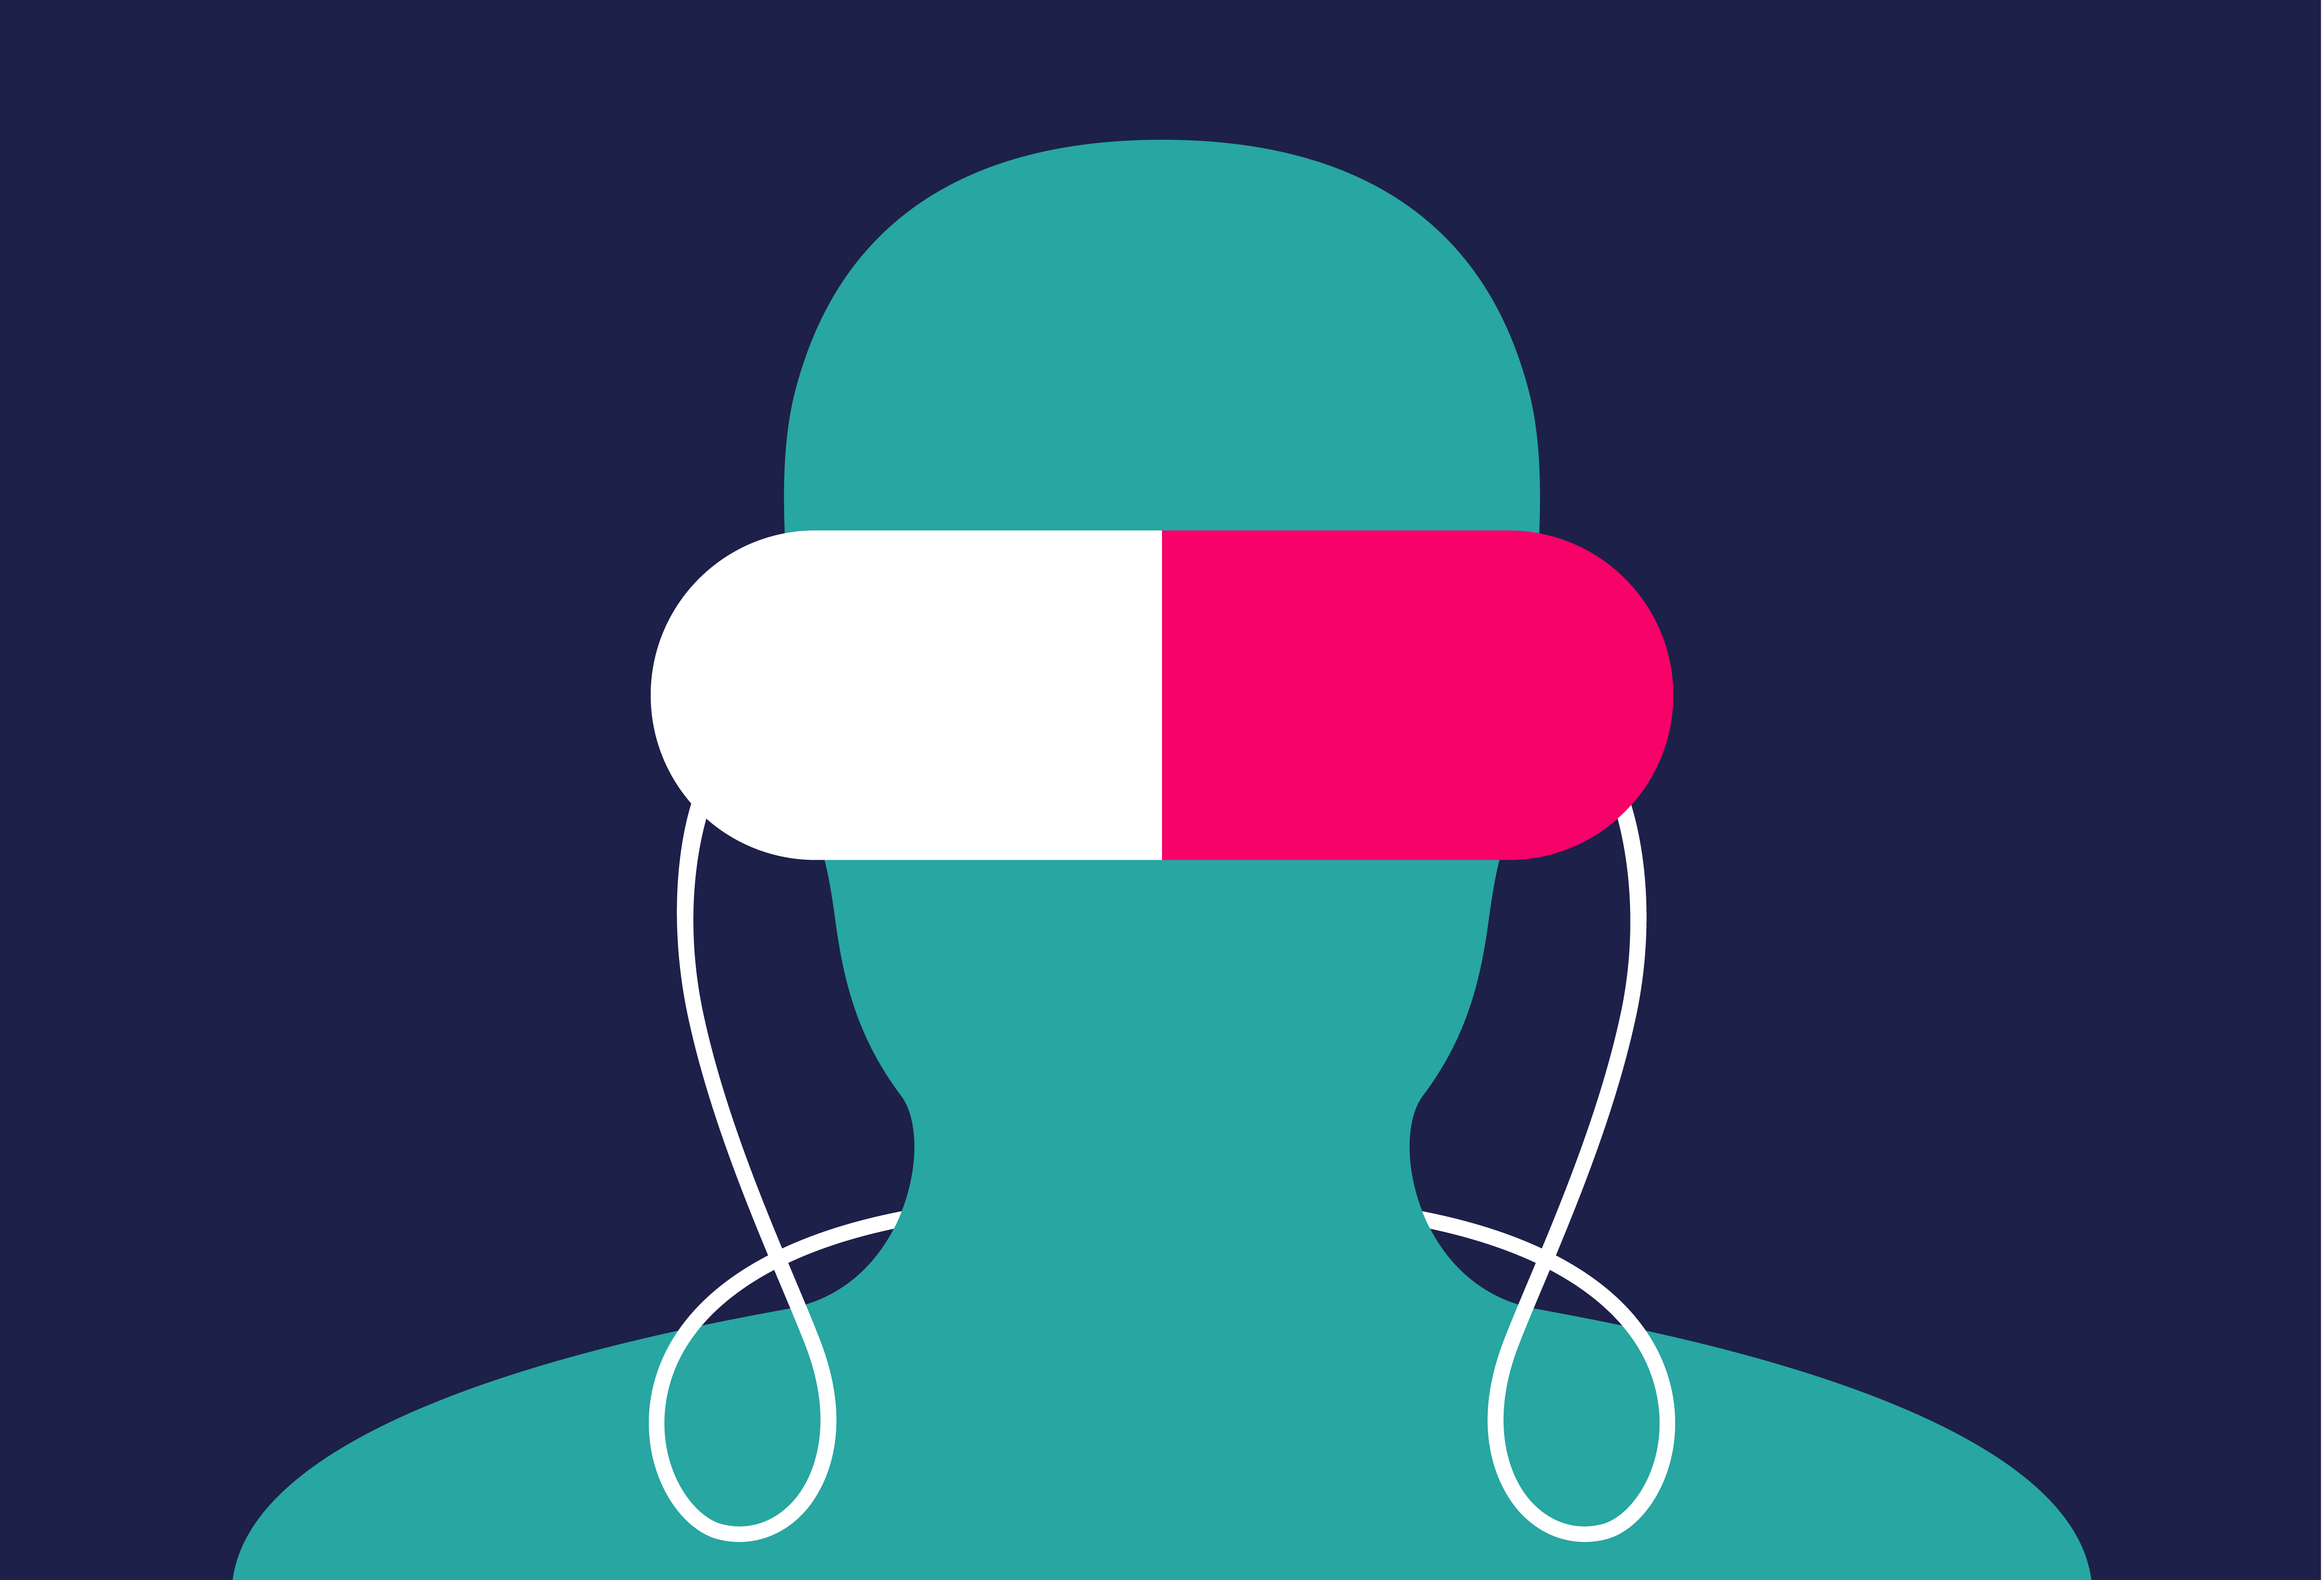 Minimalist vector art illustration of a person wearing a VR headset that resembles a drug pill by digital artist Baz Grafton.